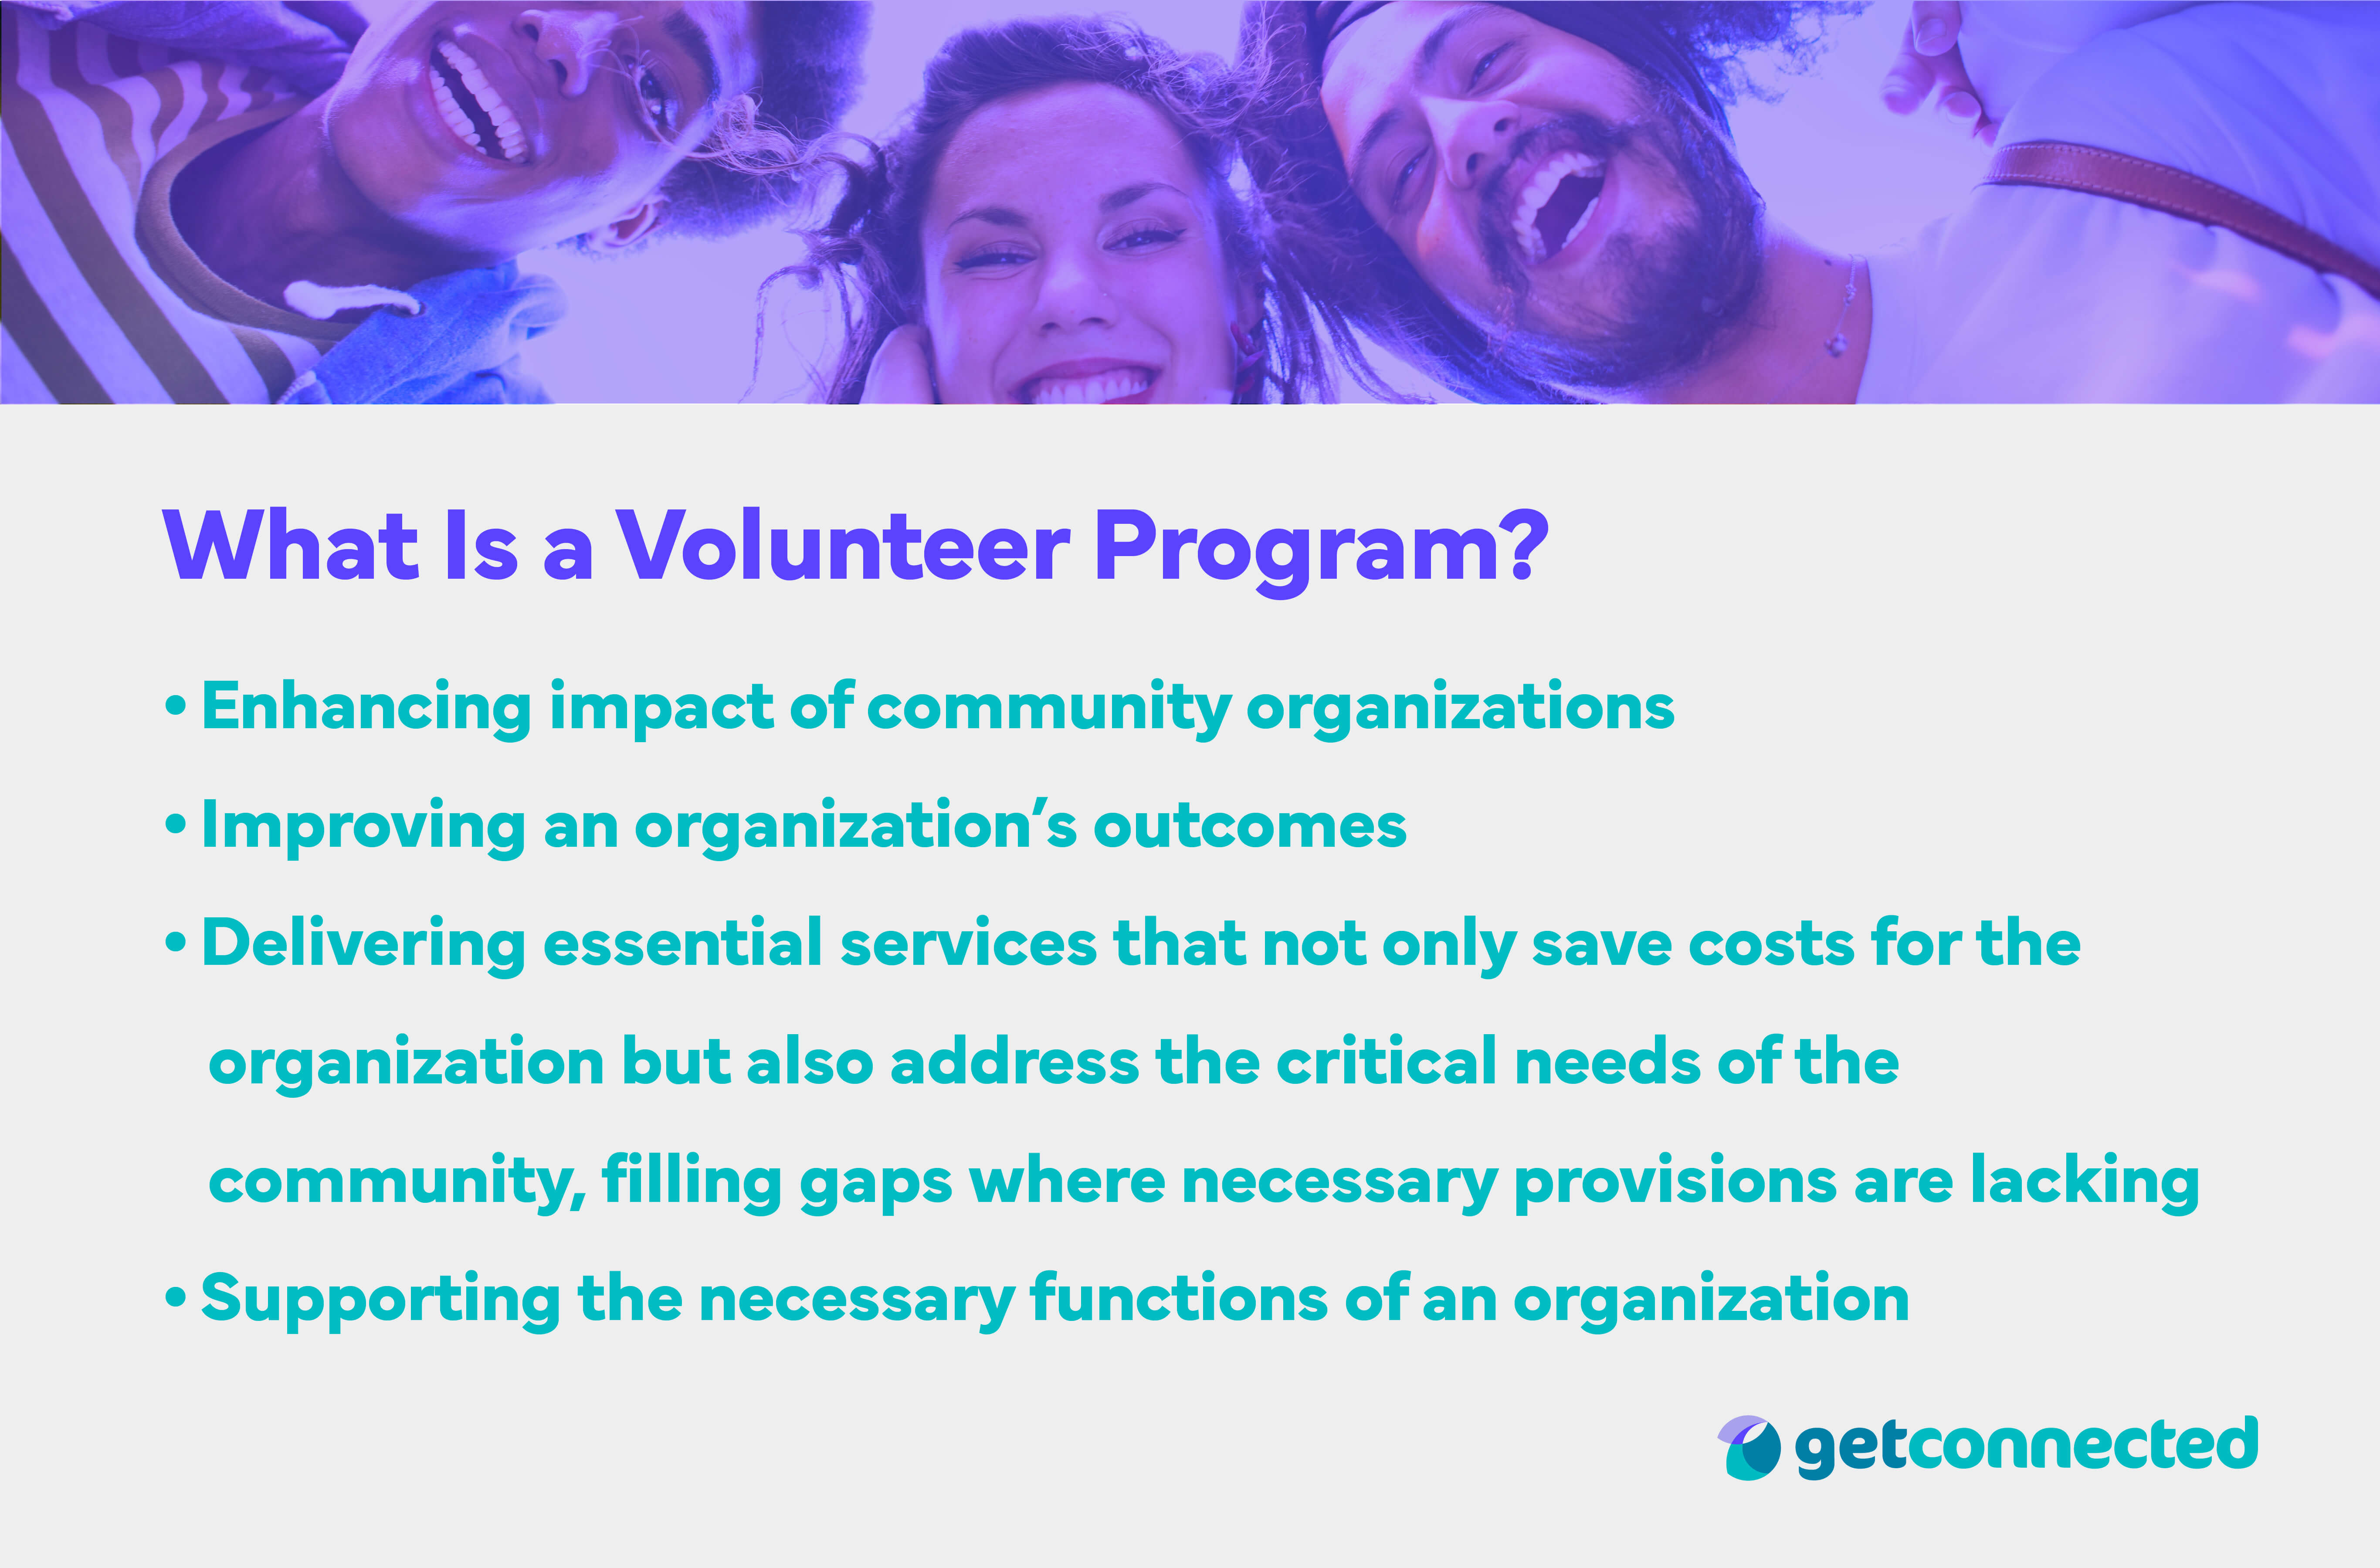 How to start a volunteer program answering what is a volunteer program